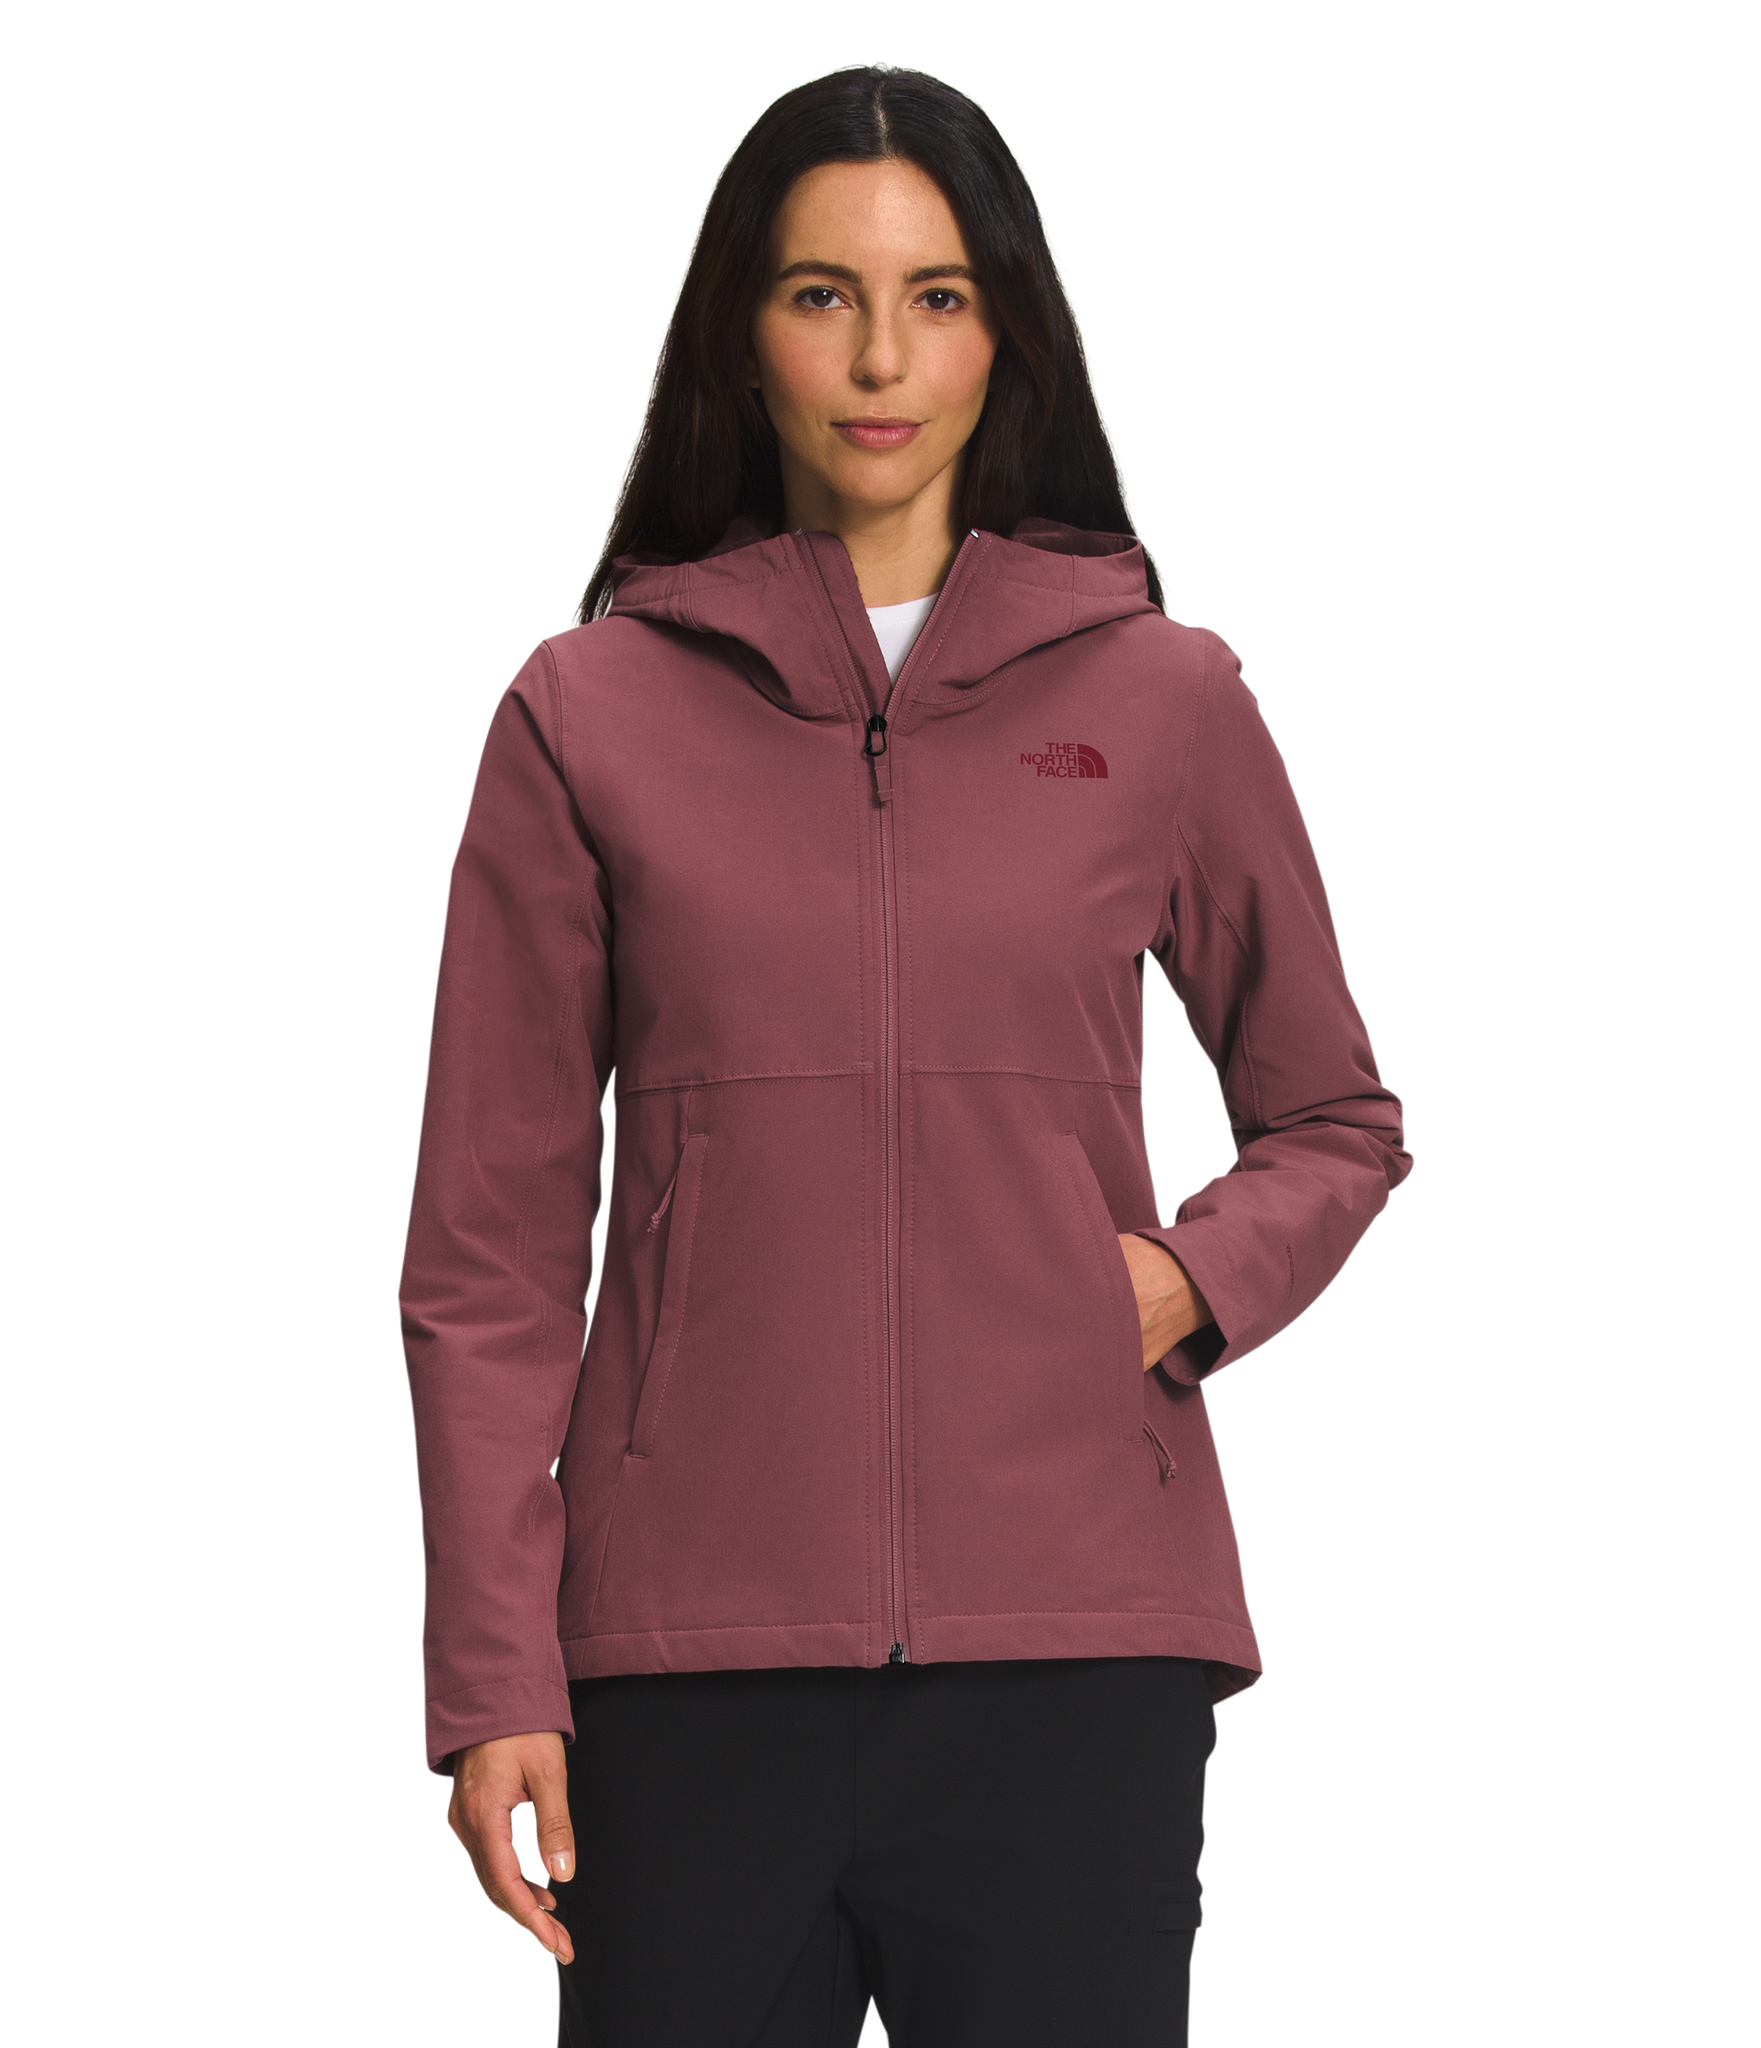 Women's Shelbe Raschel Hoodie - The Benchmark Outdoor Outfitters